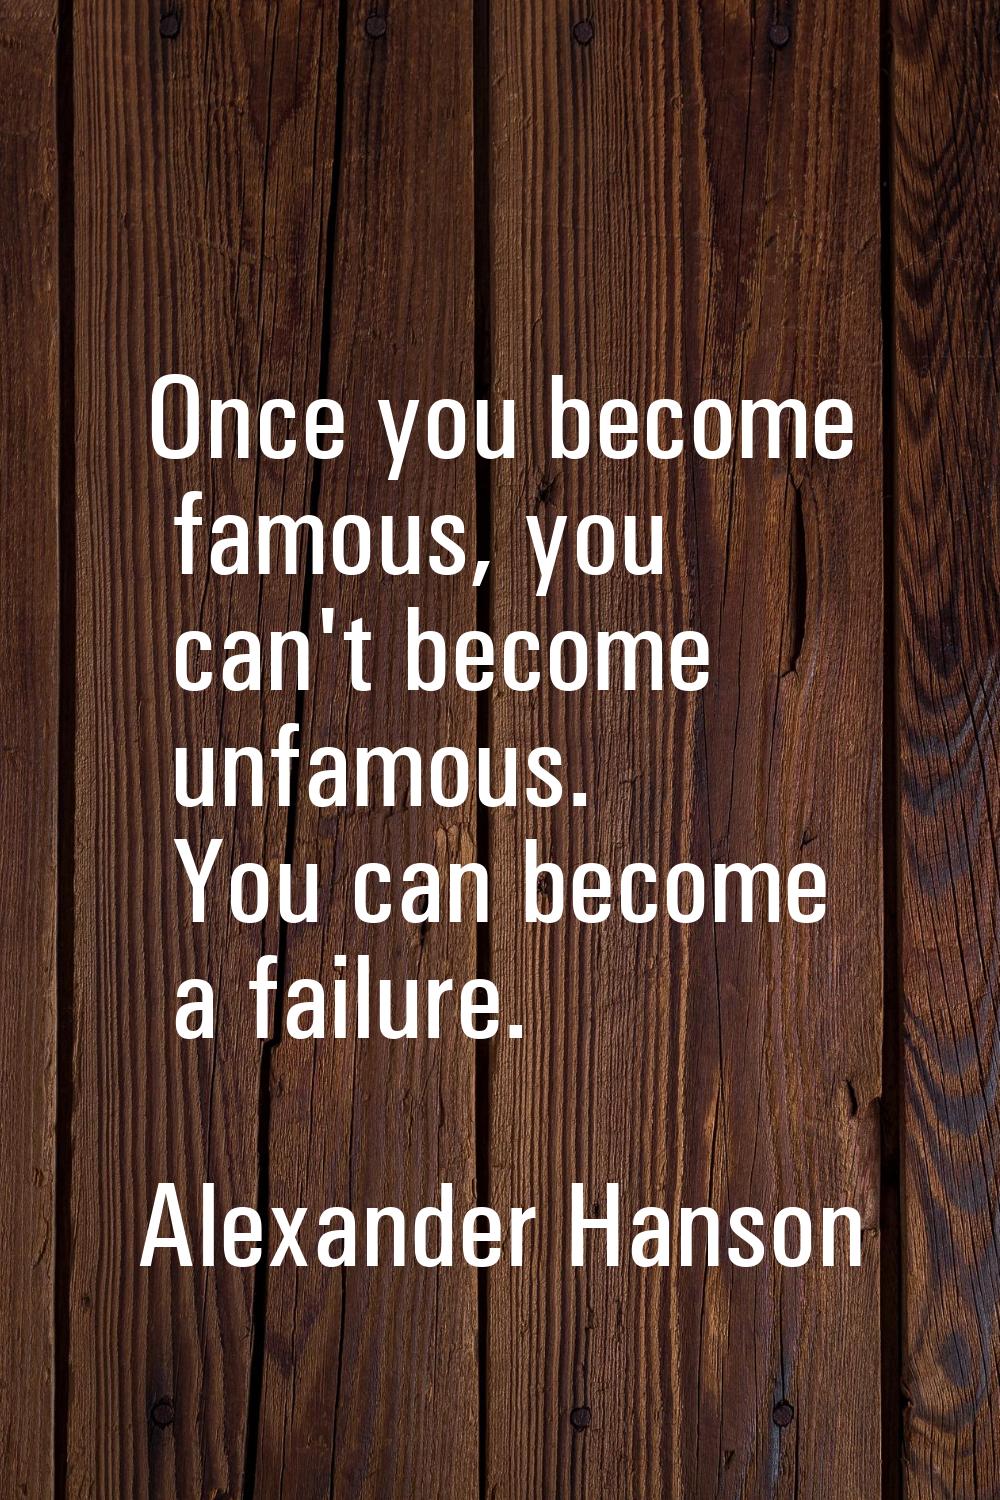 Once you become famous, you can't become unfamous. You can become a failure.